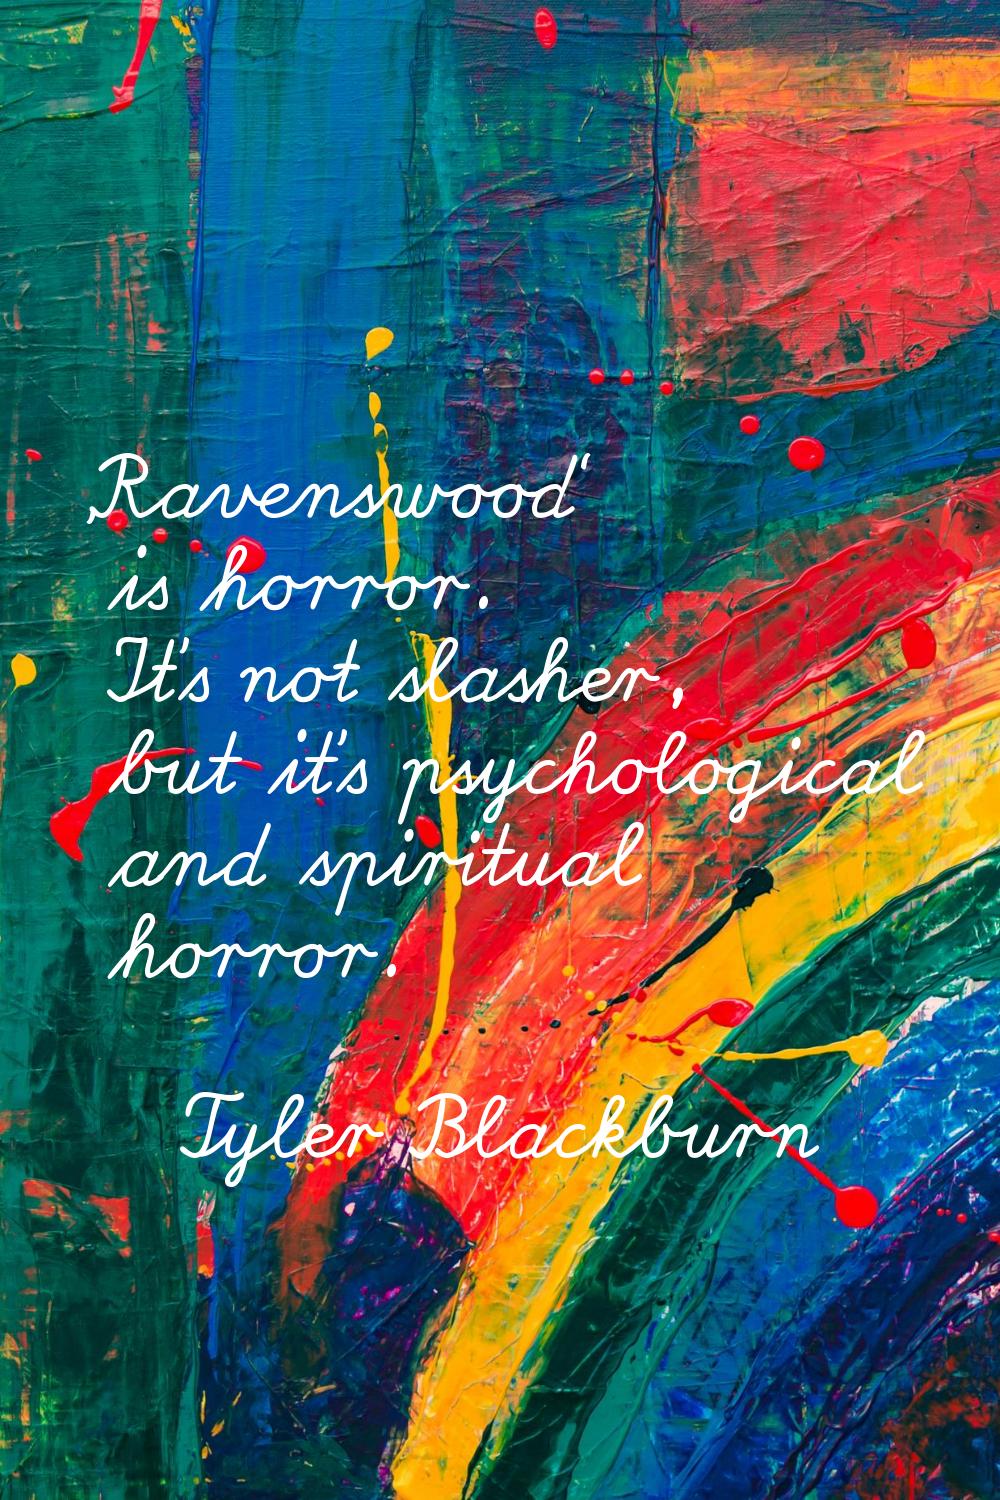 'Ravenswood' is horror. It's not slasher, but it's psychological and spiritual horror.